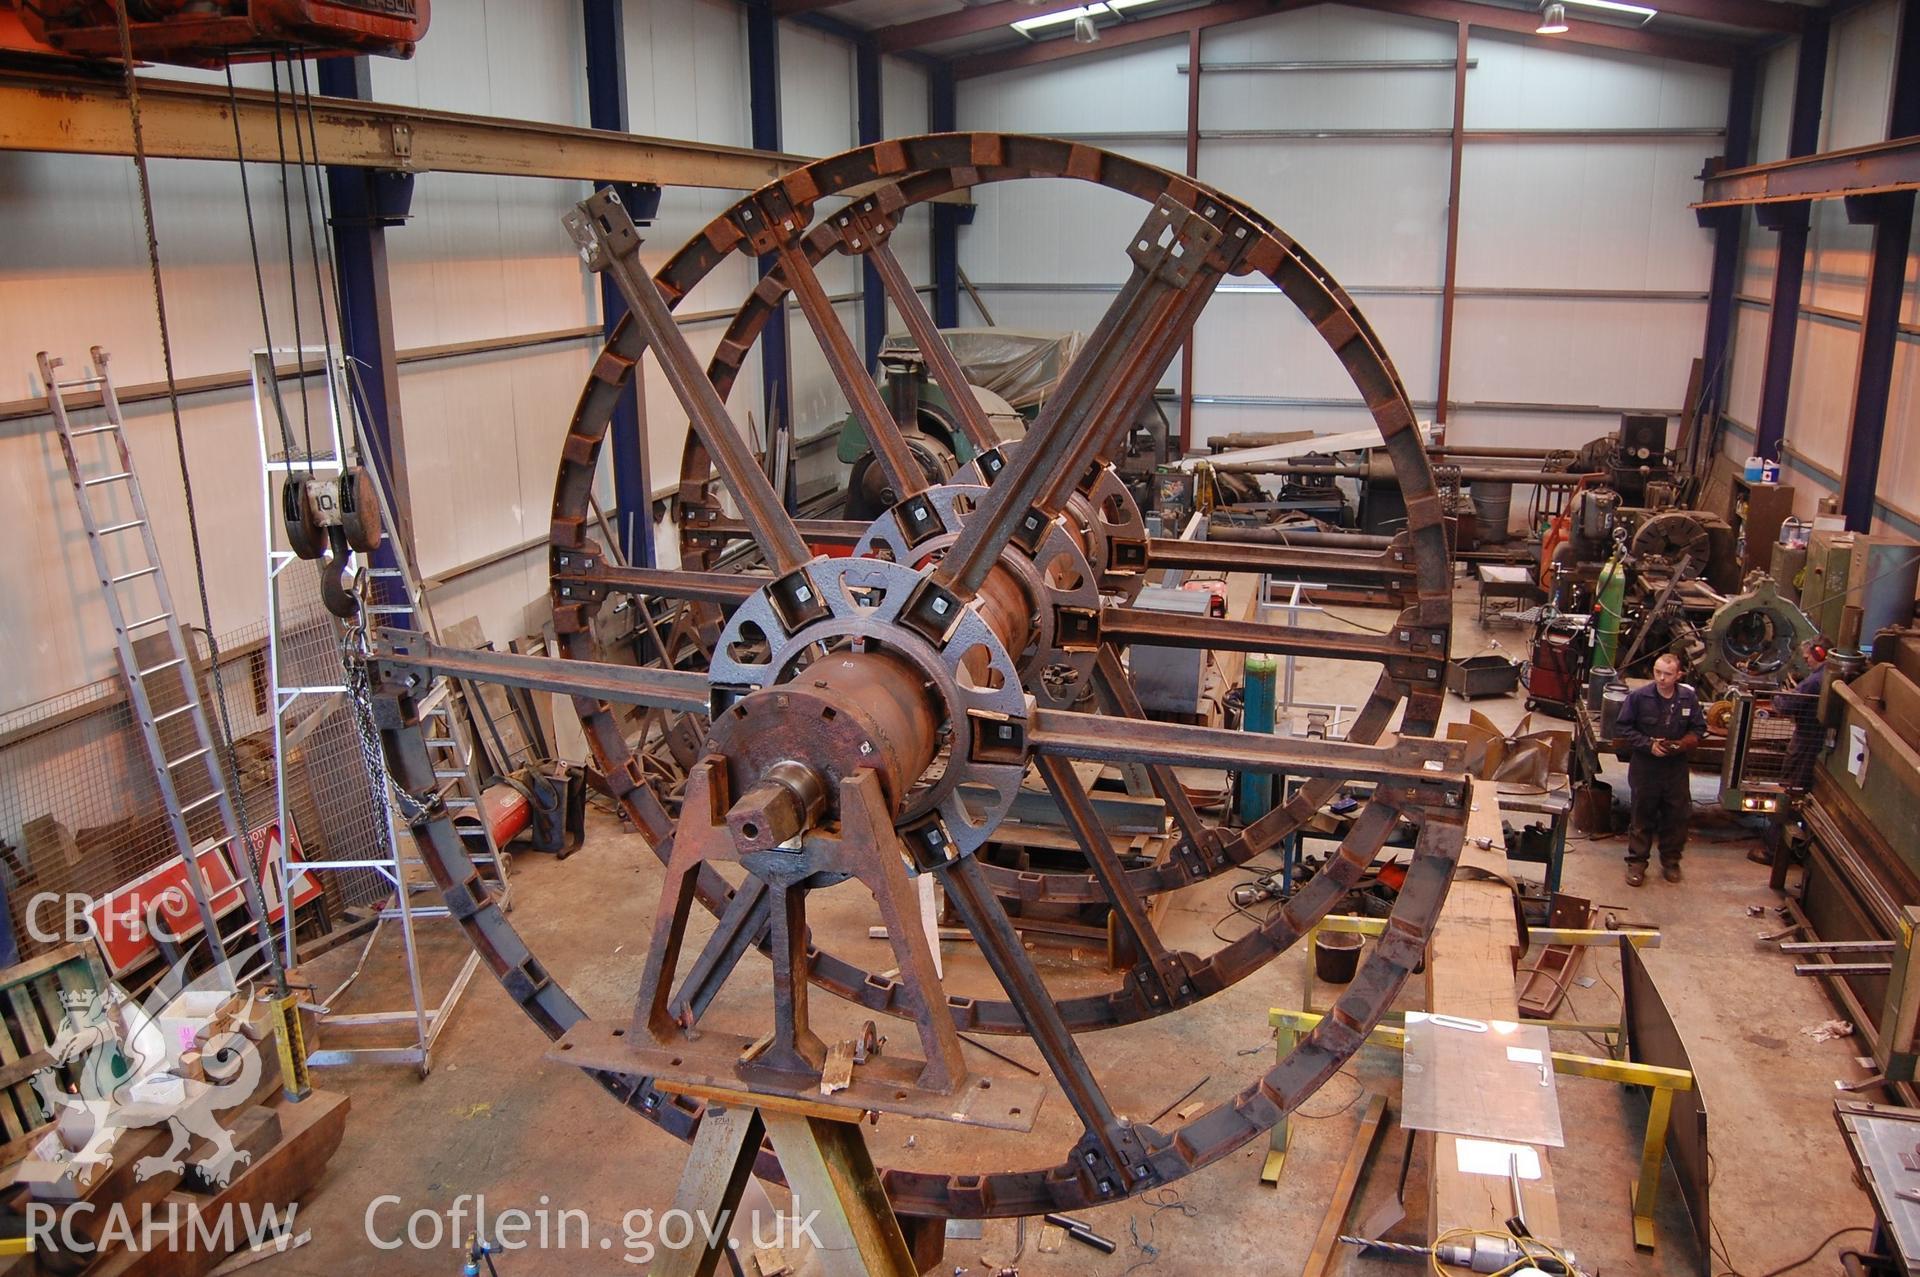 Digital image relating to Melingriffith Water Pump: Wheel being assembled following conservation and repair work.